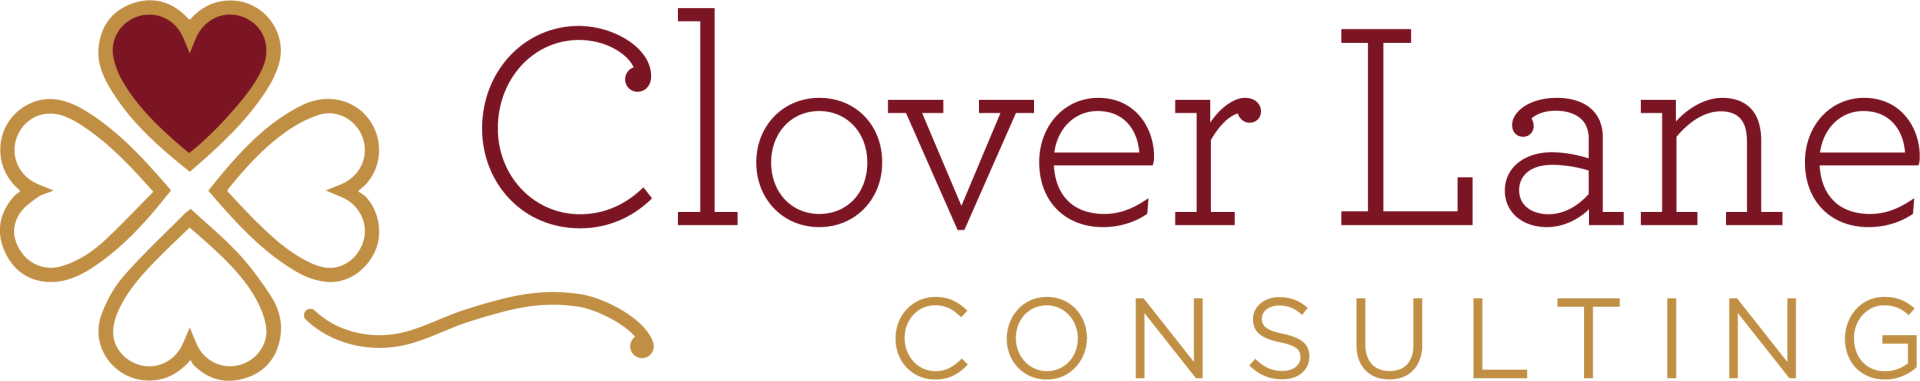 Clover Lane Consulting